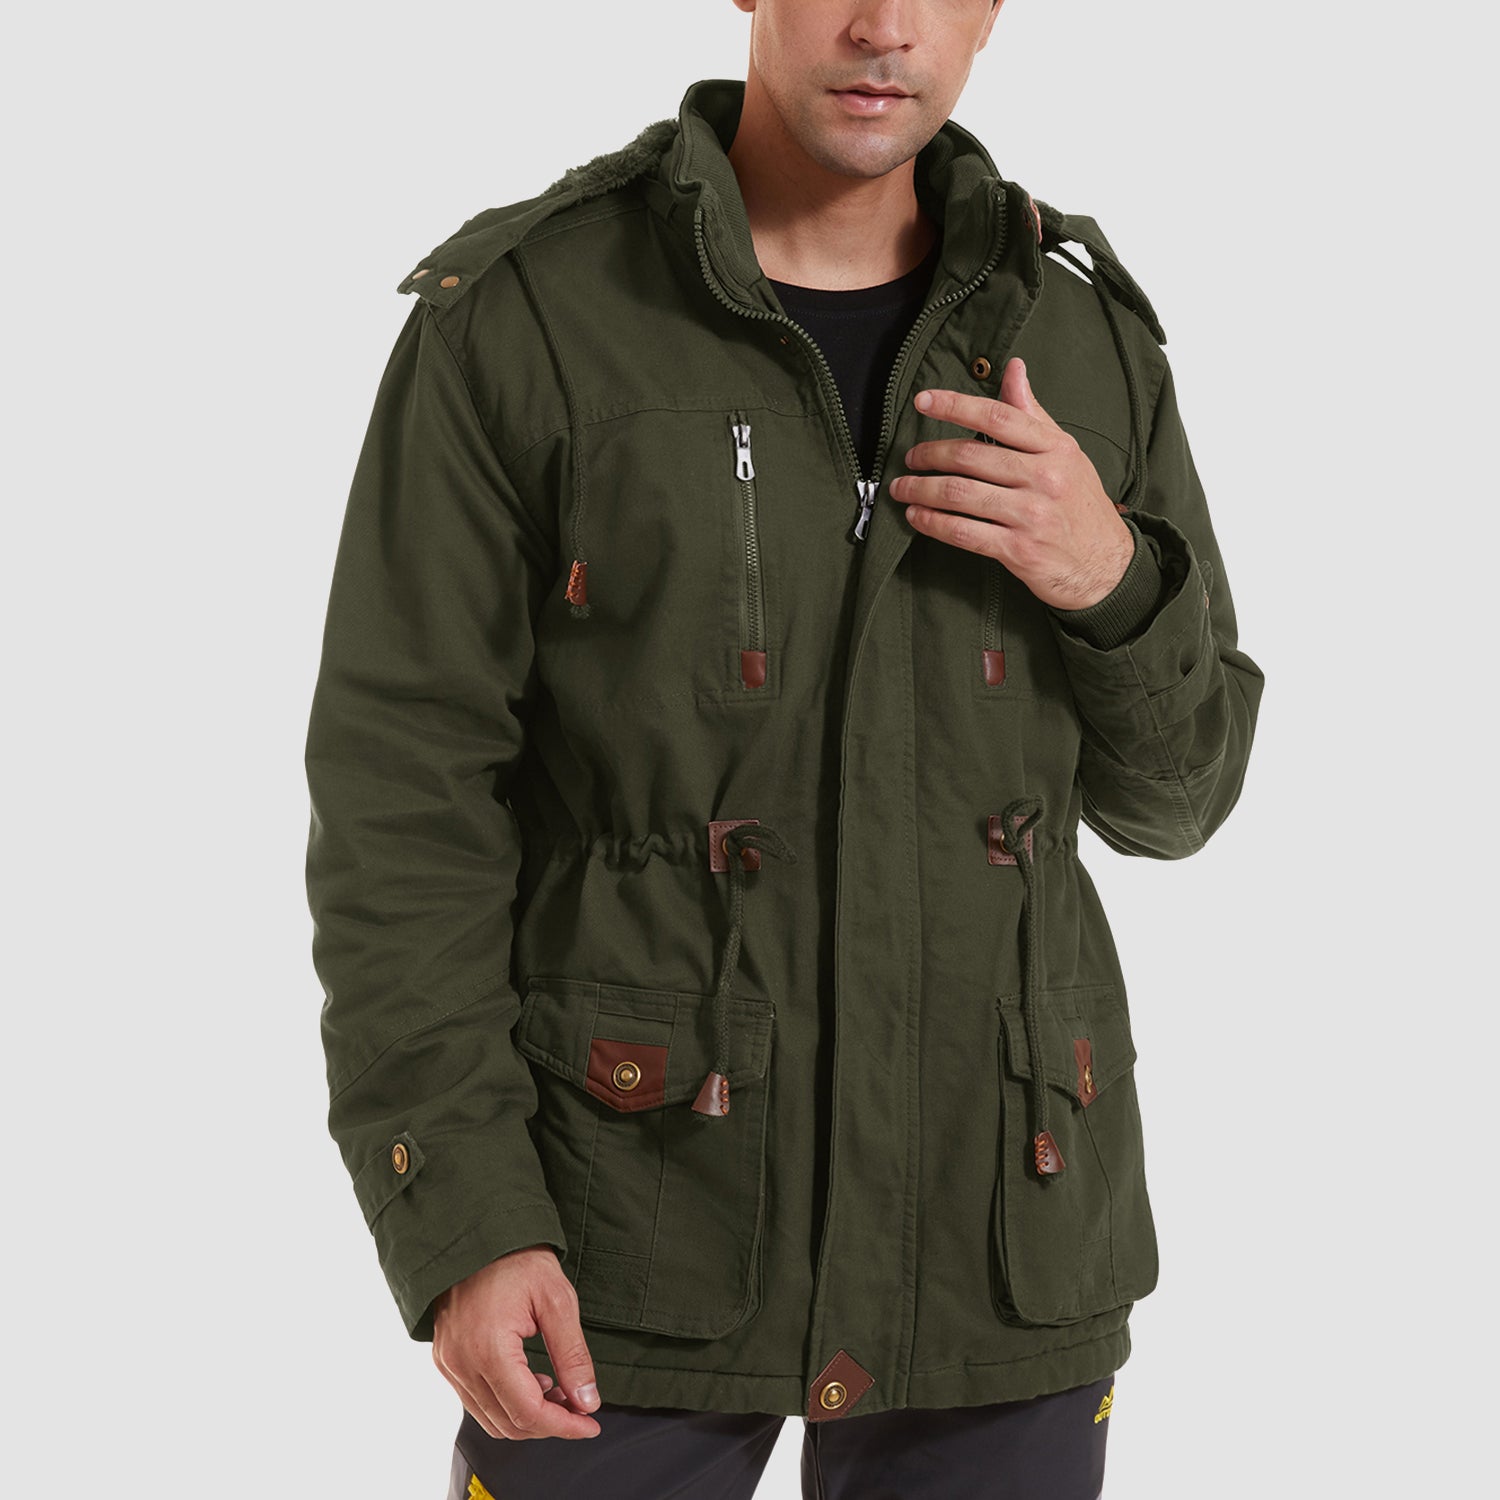 &SONS Harris Bomber Jacket Army Green